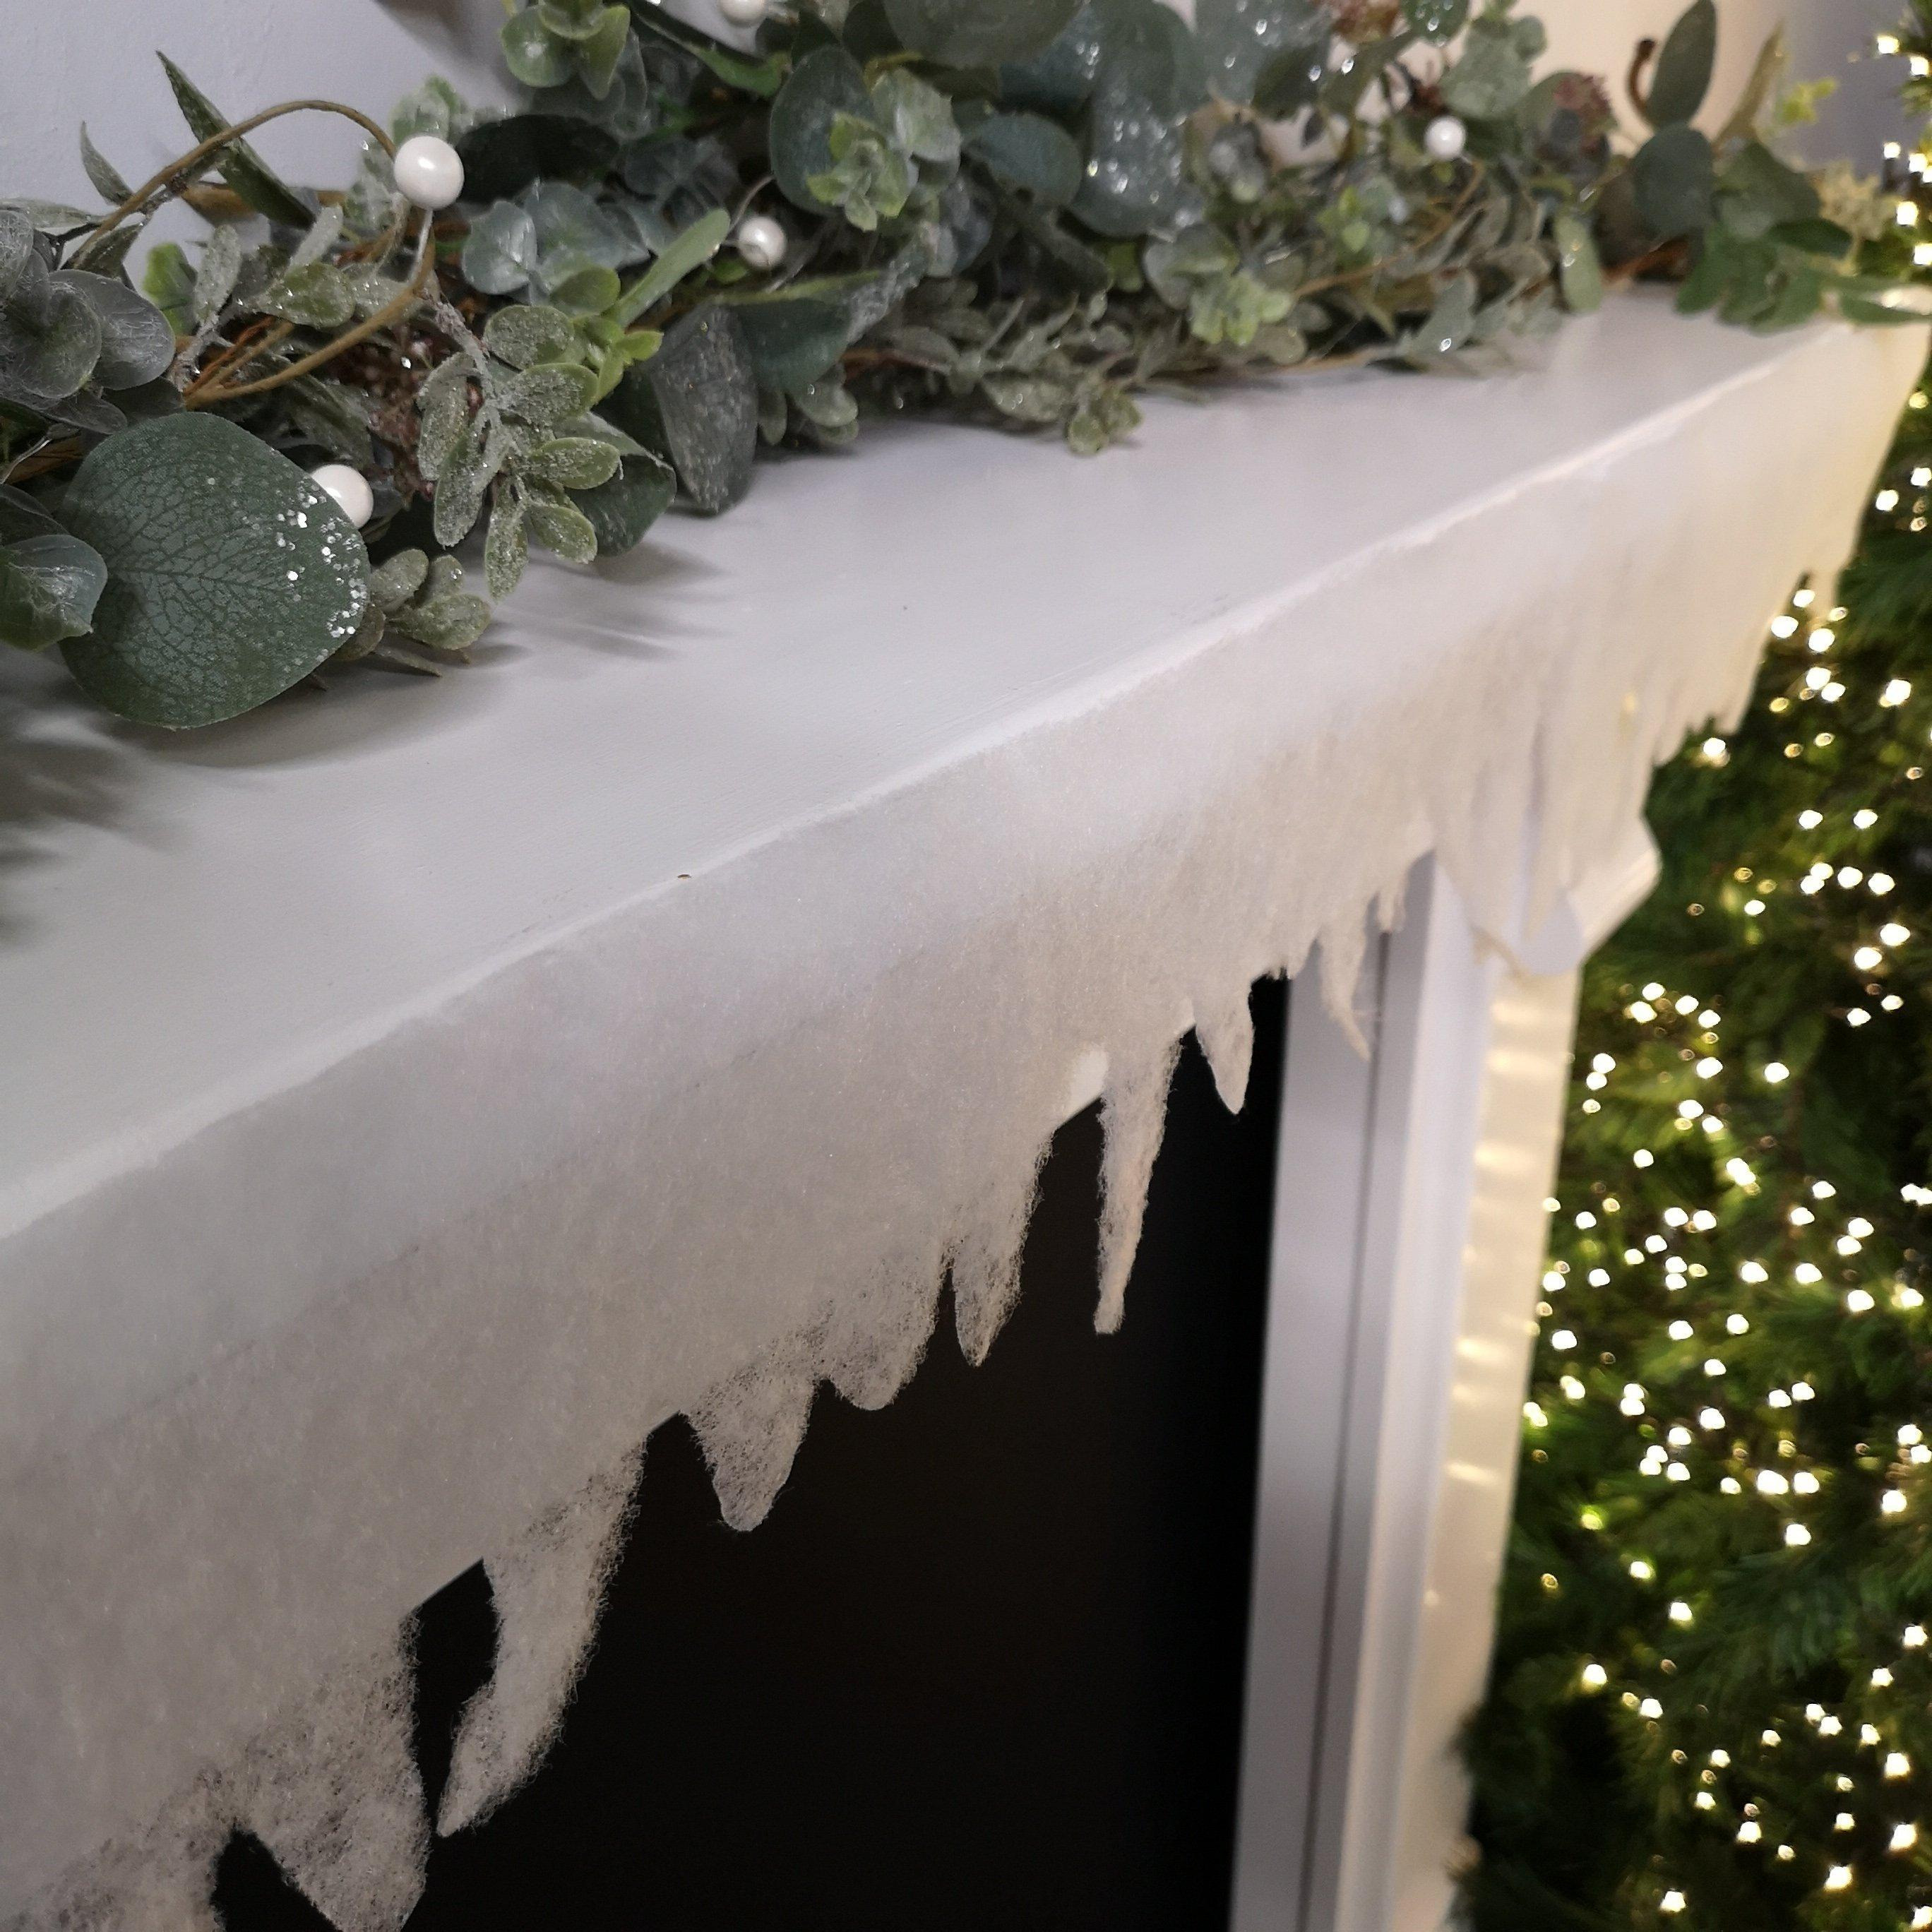 Craft Christmas Fake White Snow Icicle Material 4 x 45cm Drape Material - image 1